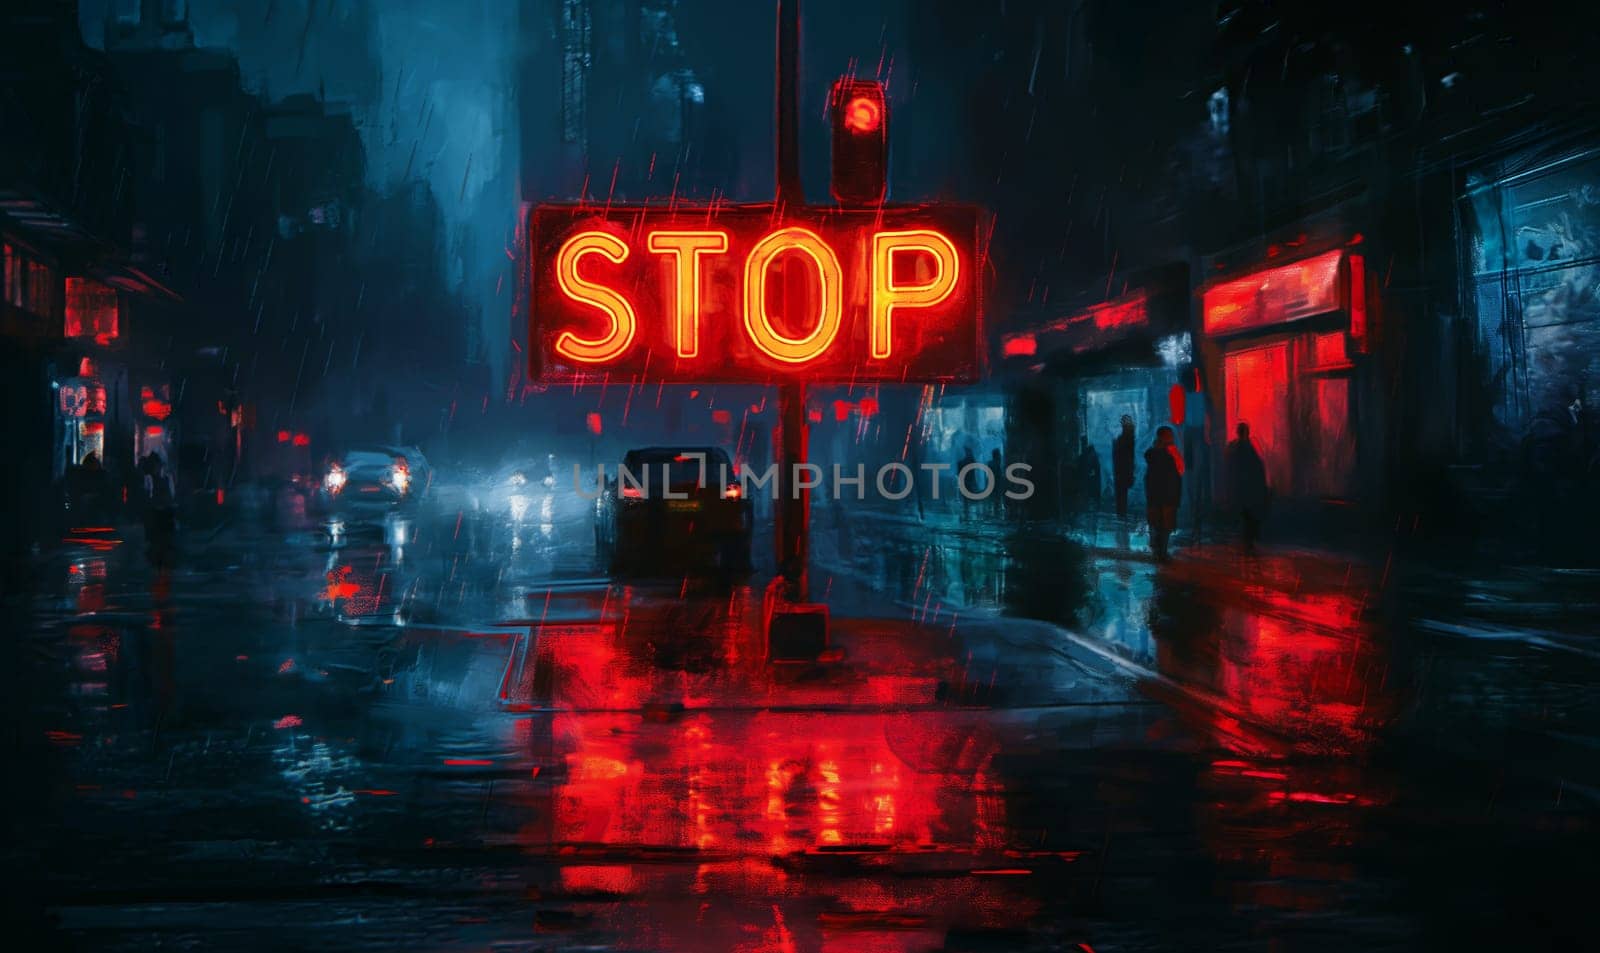 Illuminated Stop Sign at Dusk in the Rain. Selective focus.